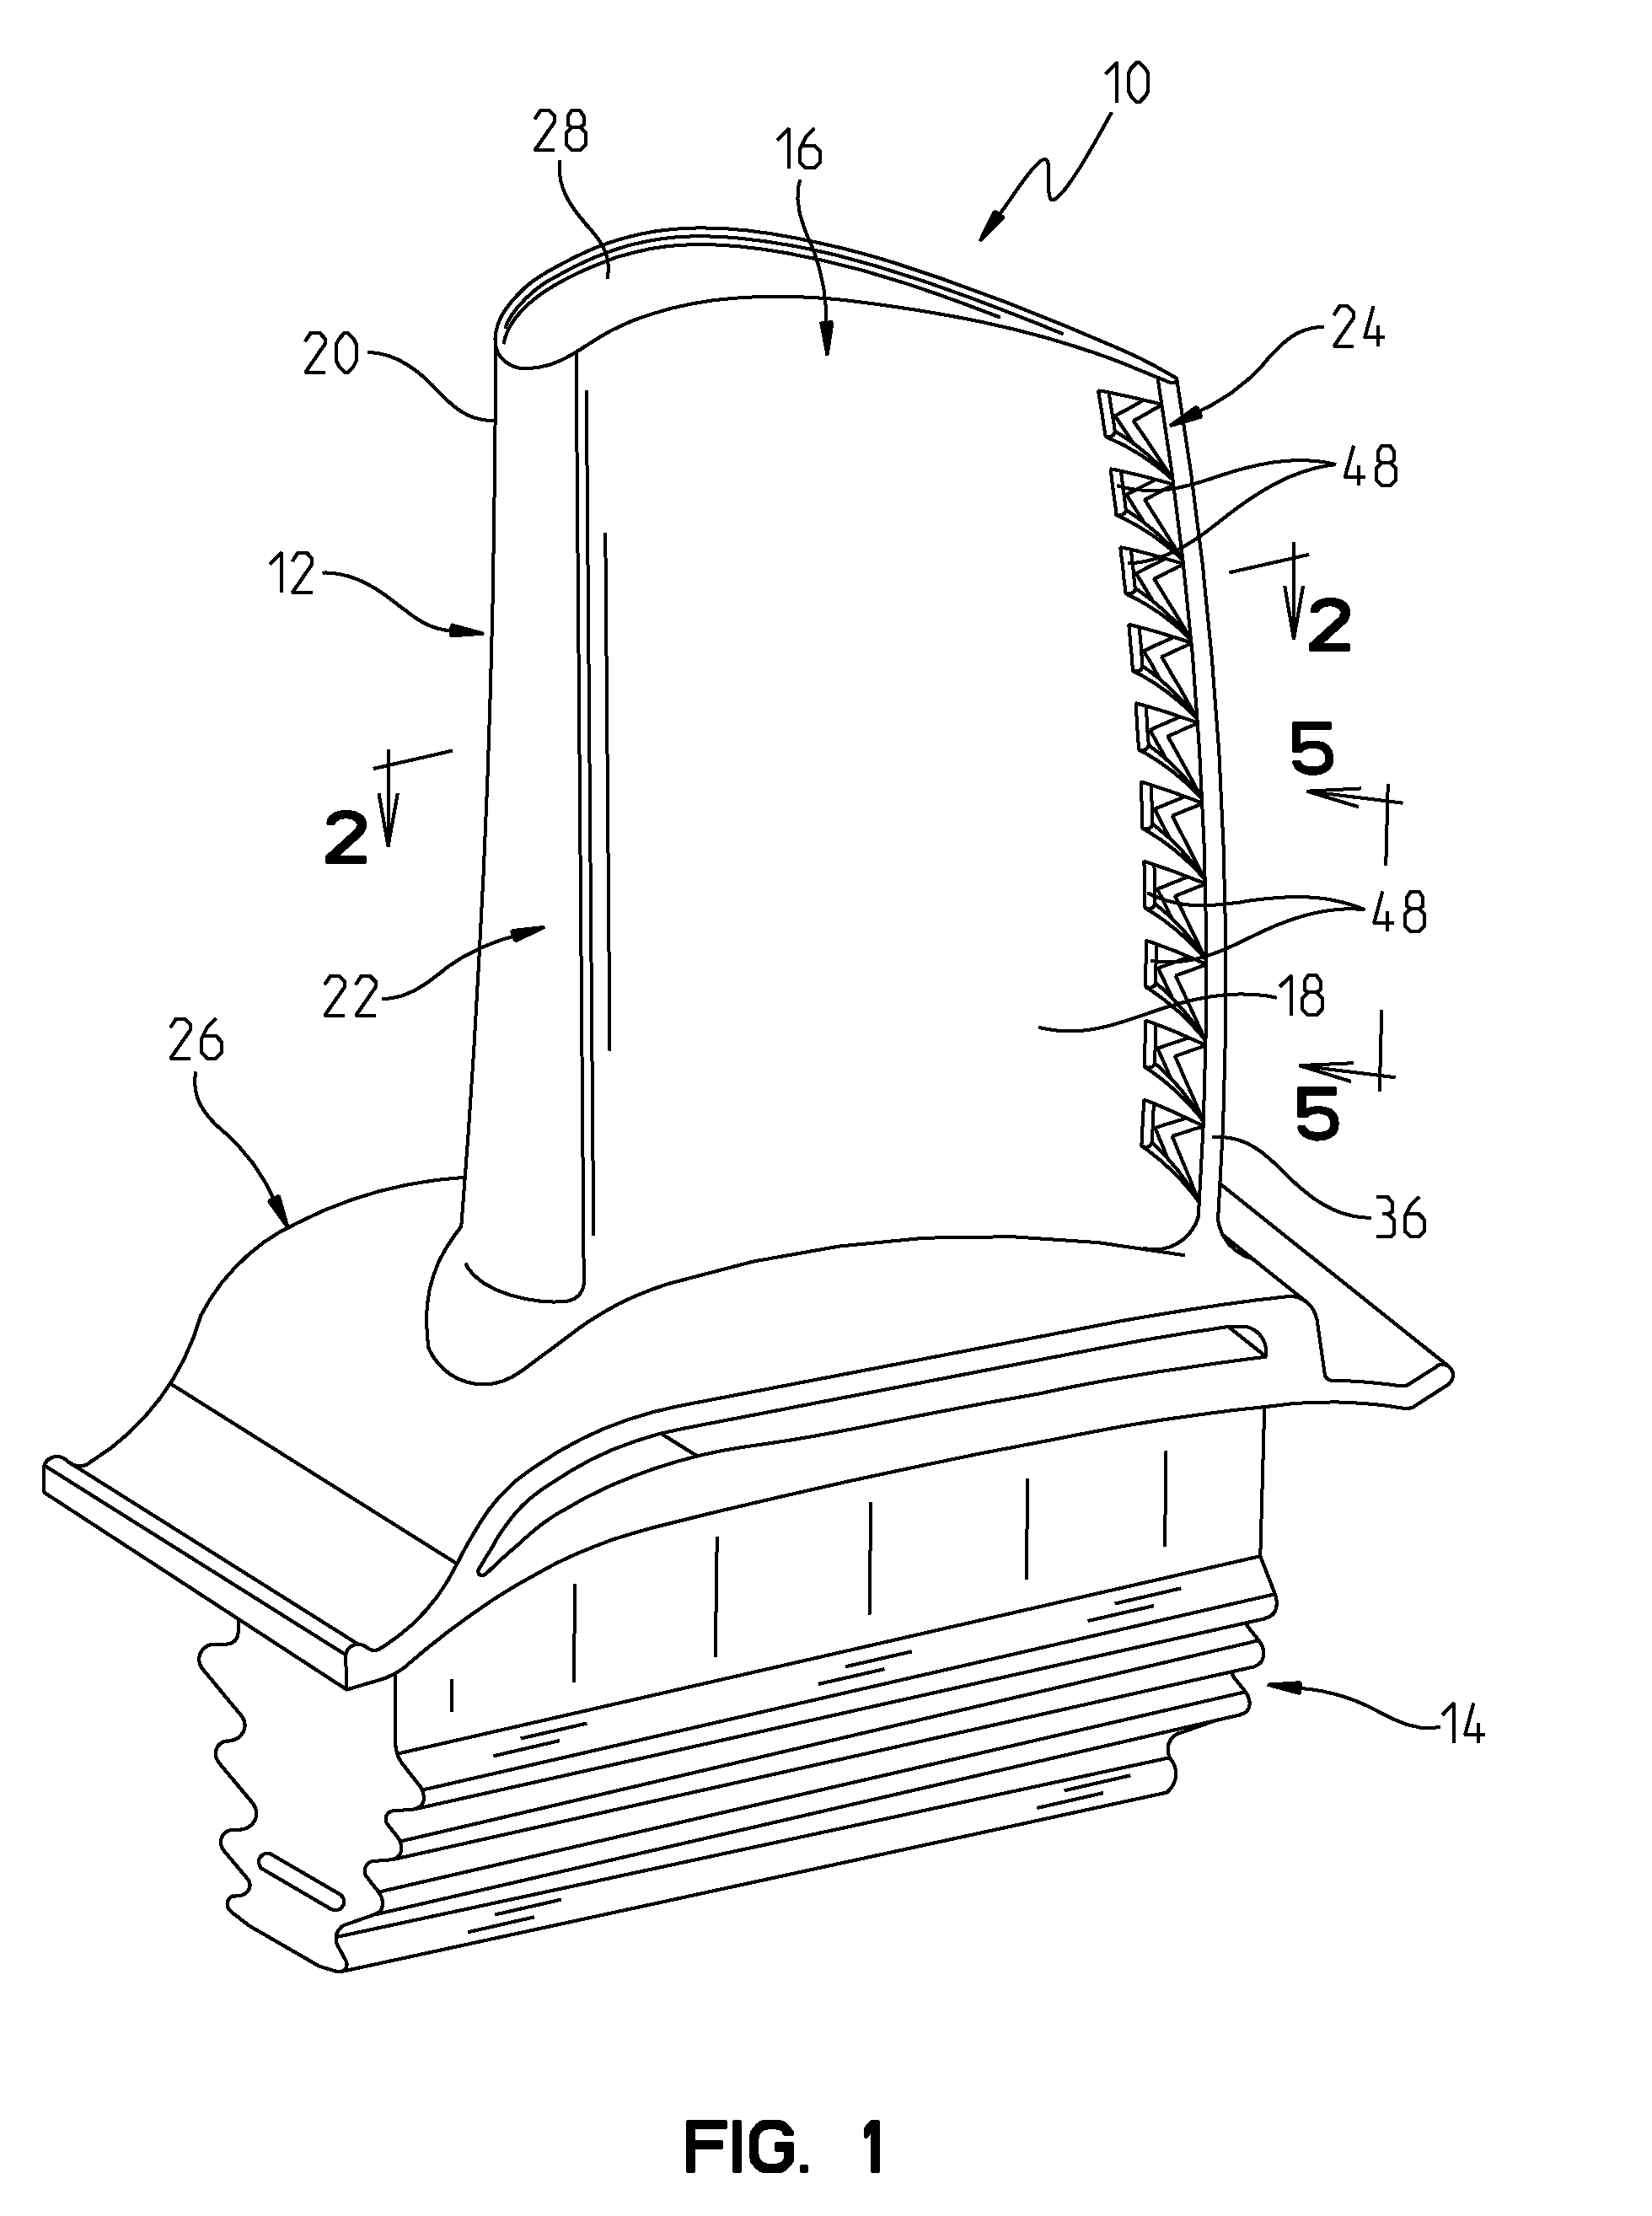 Trailing Edge Cooling Slot Configuration for a Turbine Airfoil